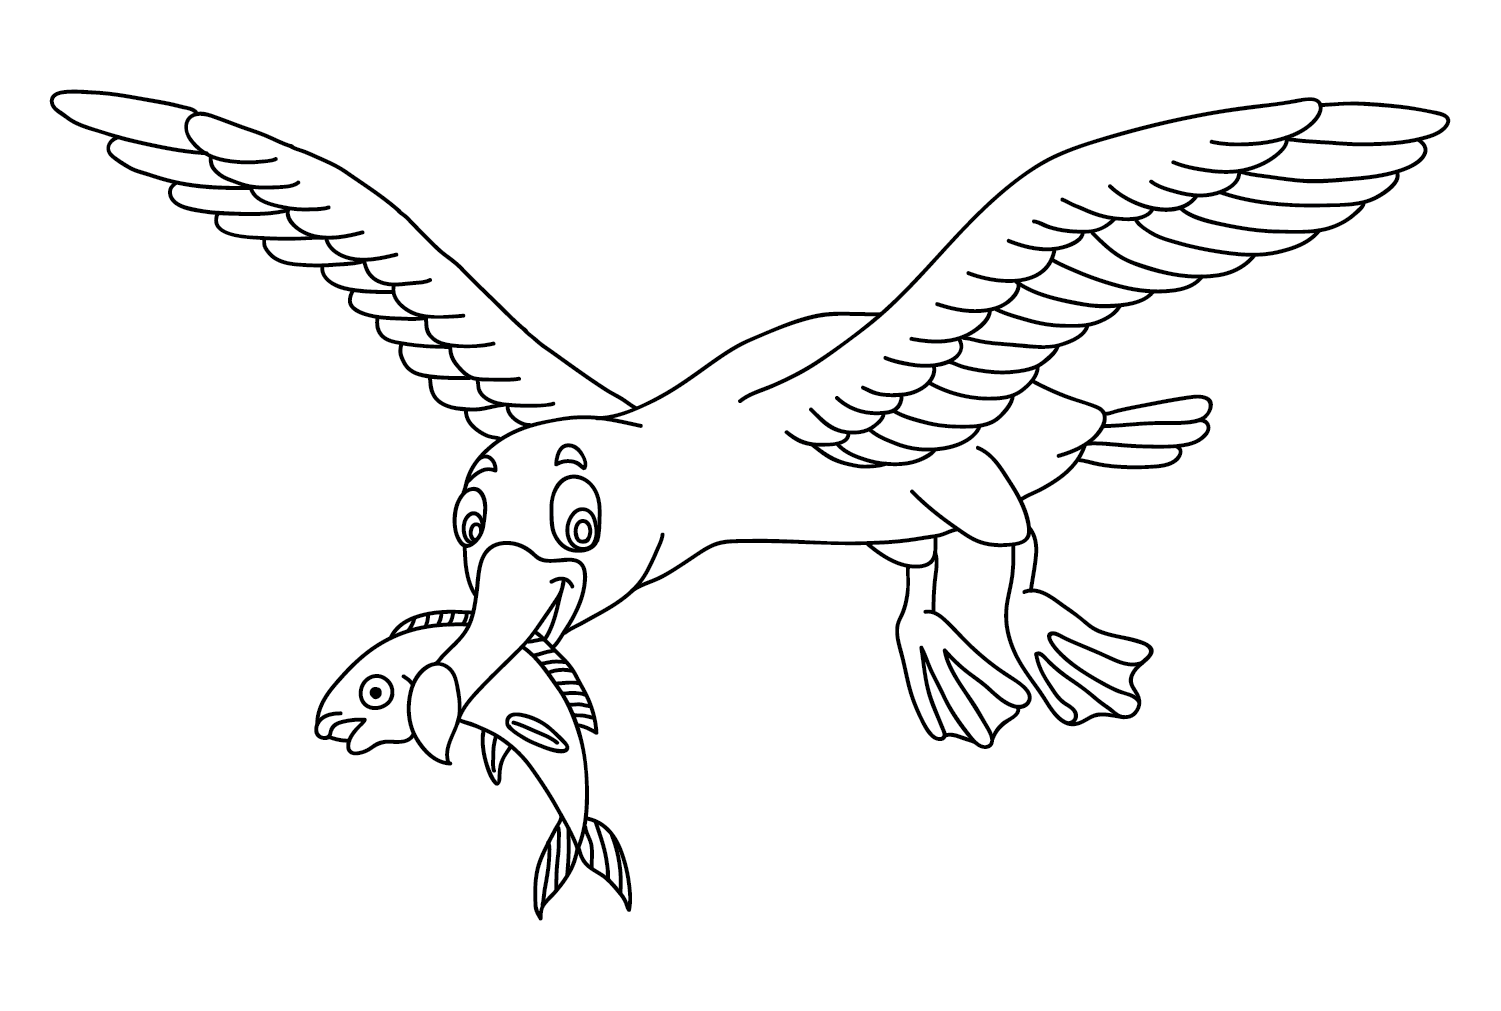 Albatross Coloring Page PDF from Albatross